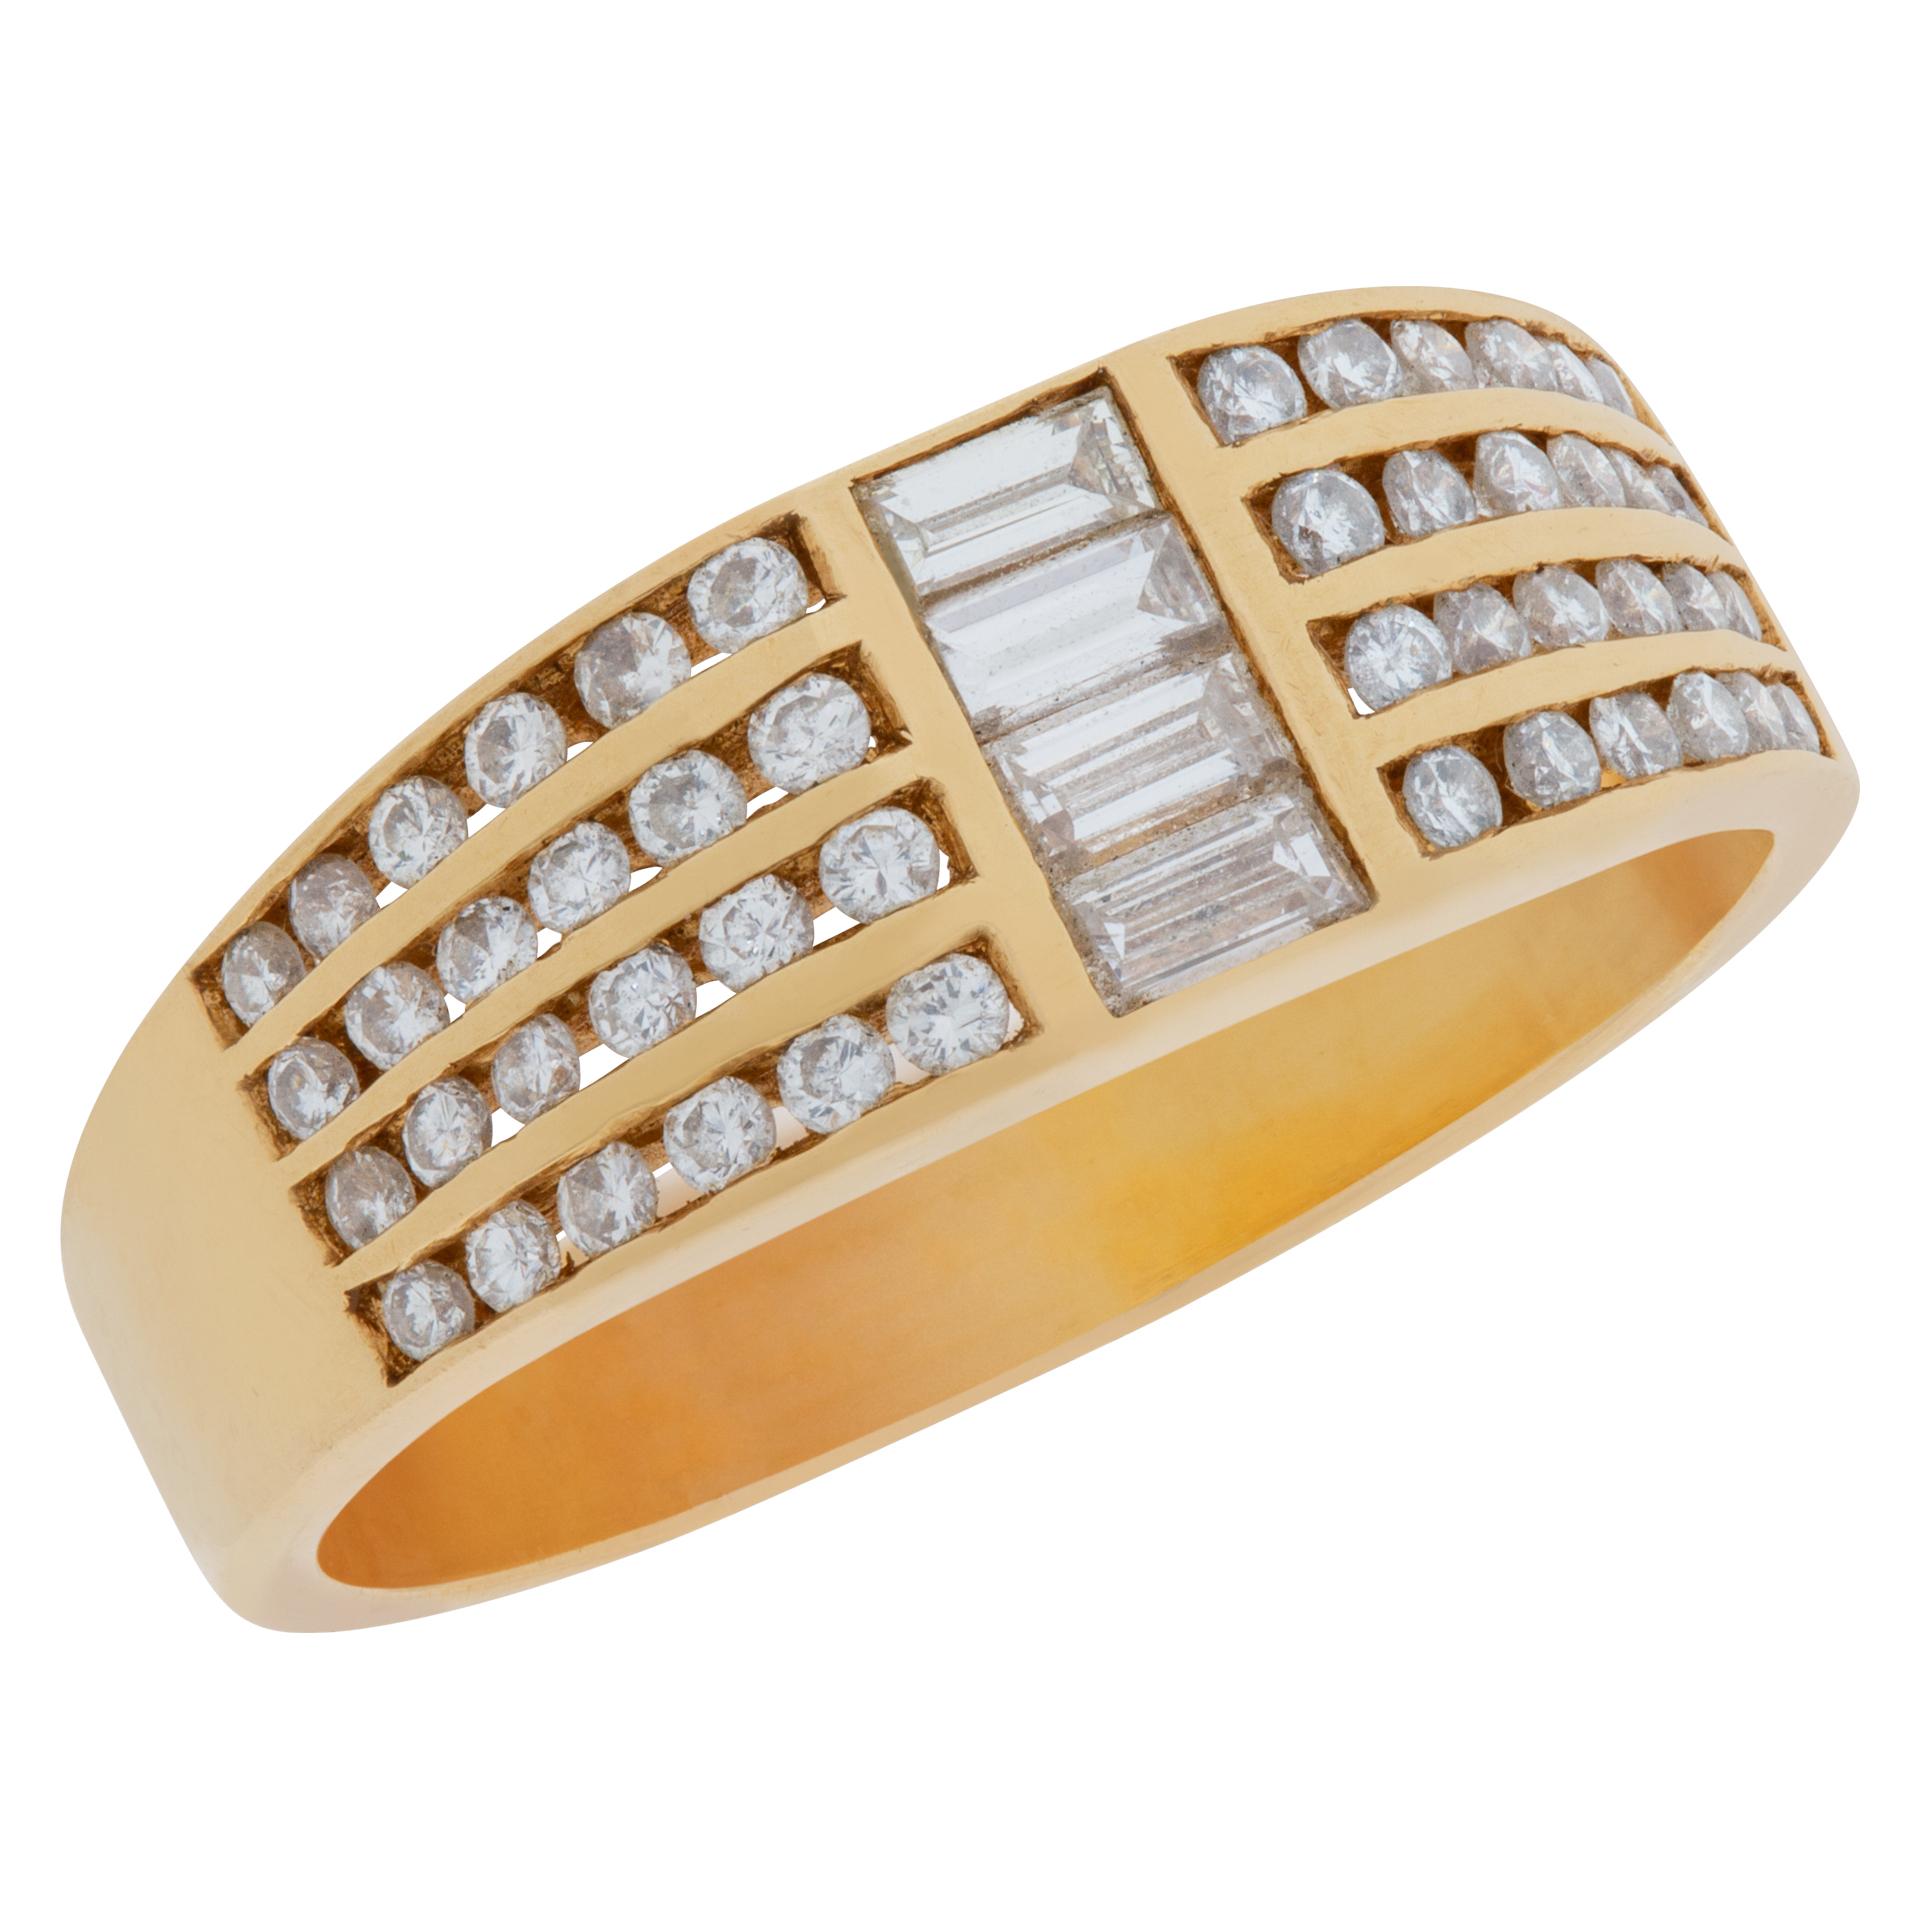 Baguette Cut Channel-Set Baguette & Round Diamond Ring in 14k Gold. 0.70 Carats in Diamonds For Sale